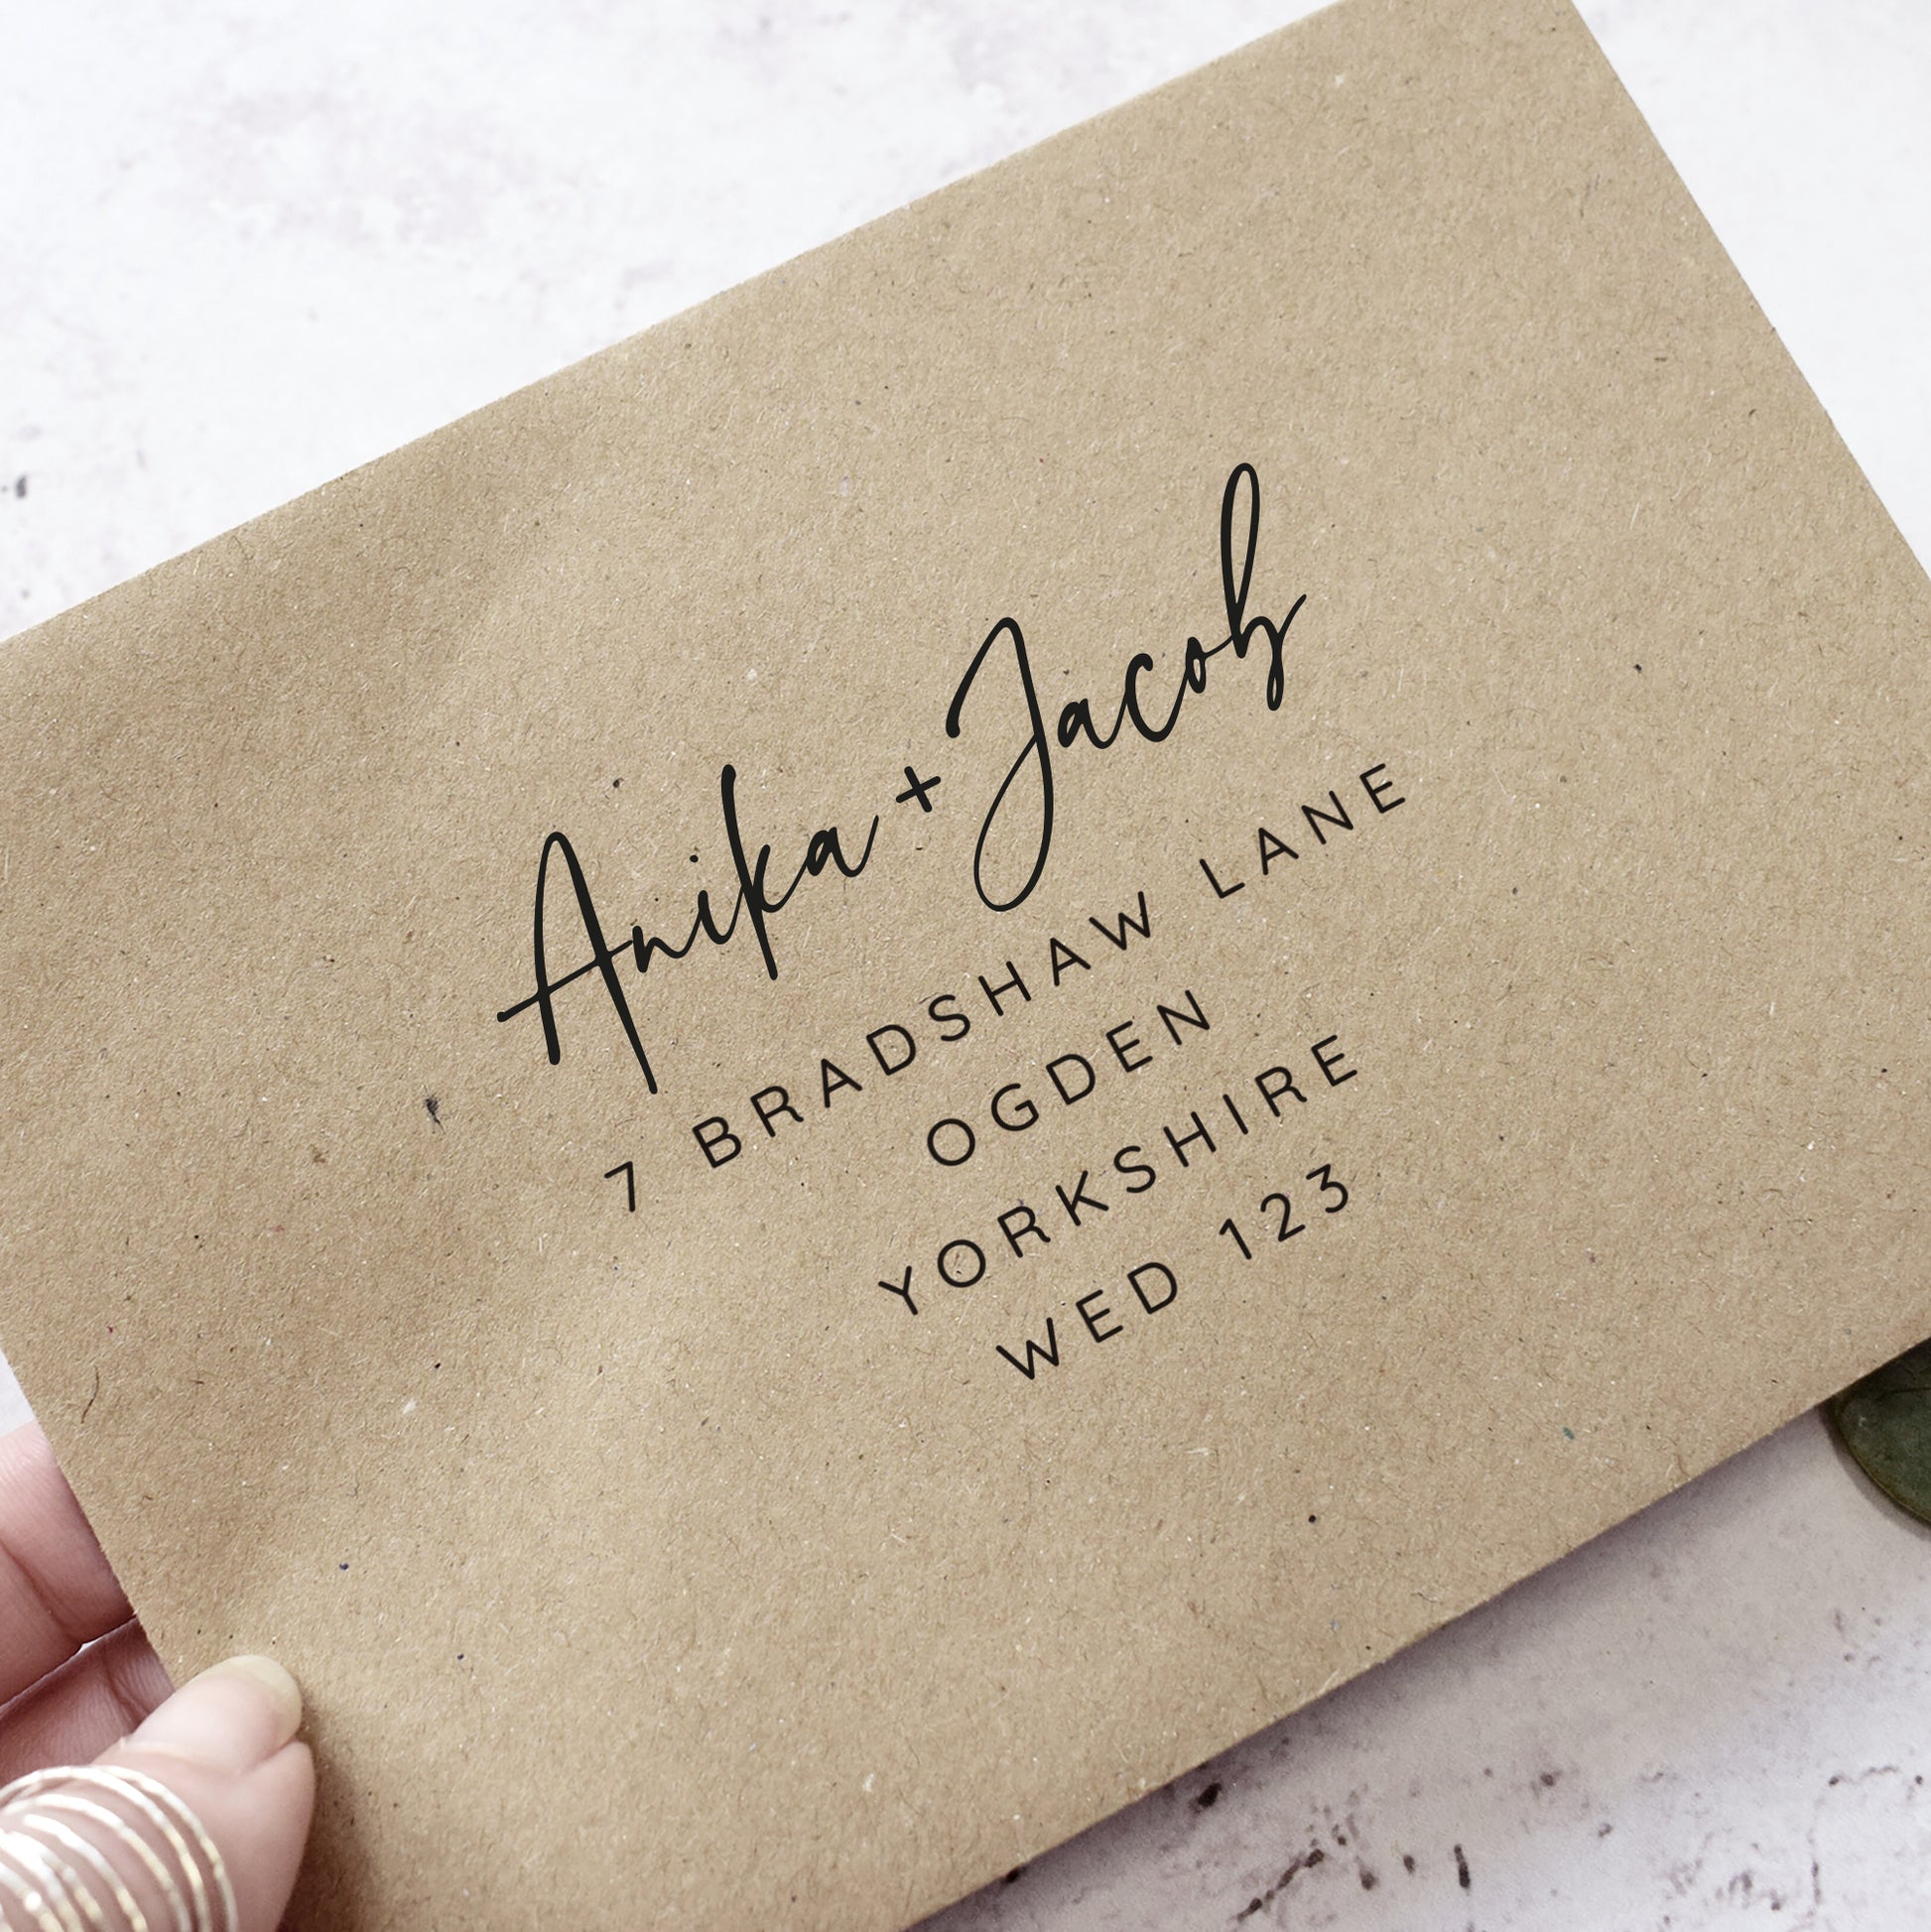 Rustic Kraft wedding envelopes printed with guest names and addresses